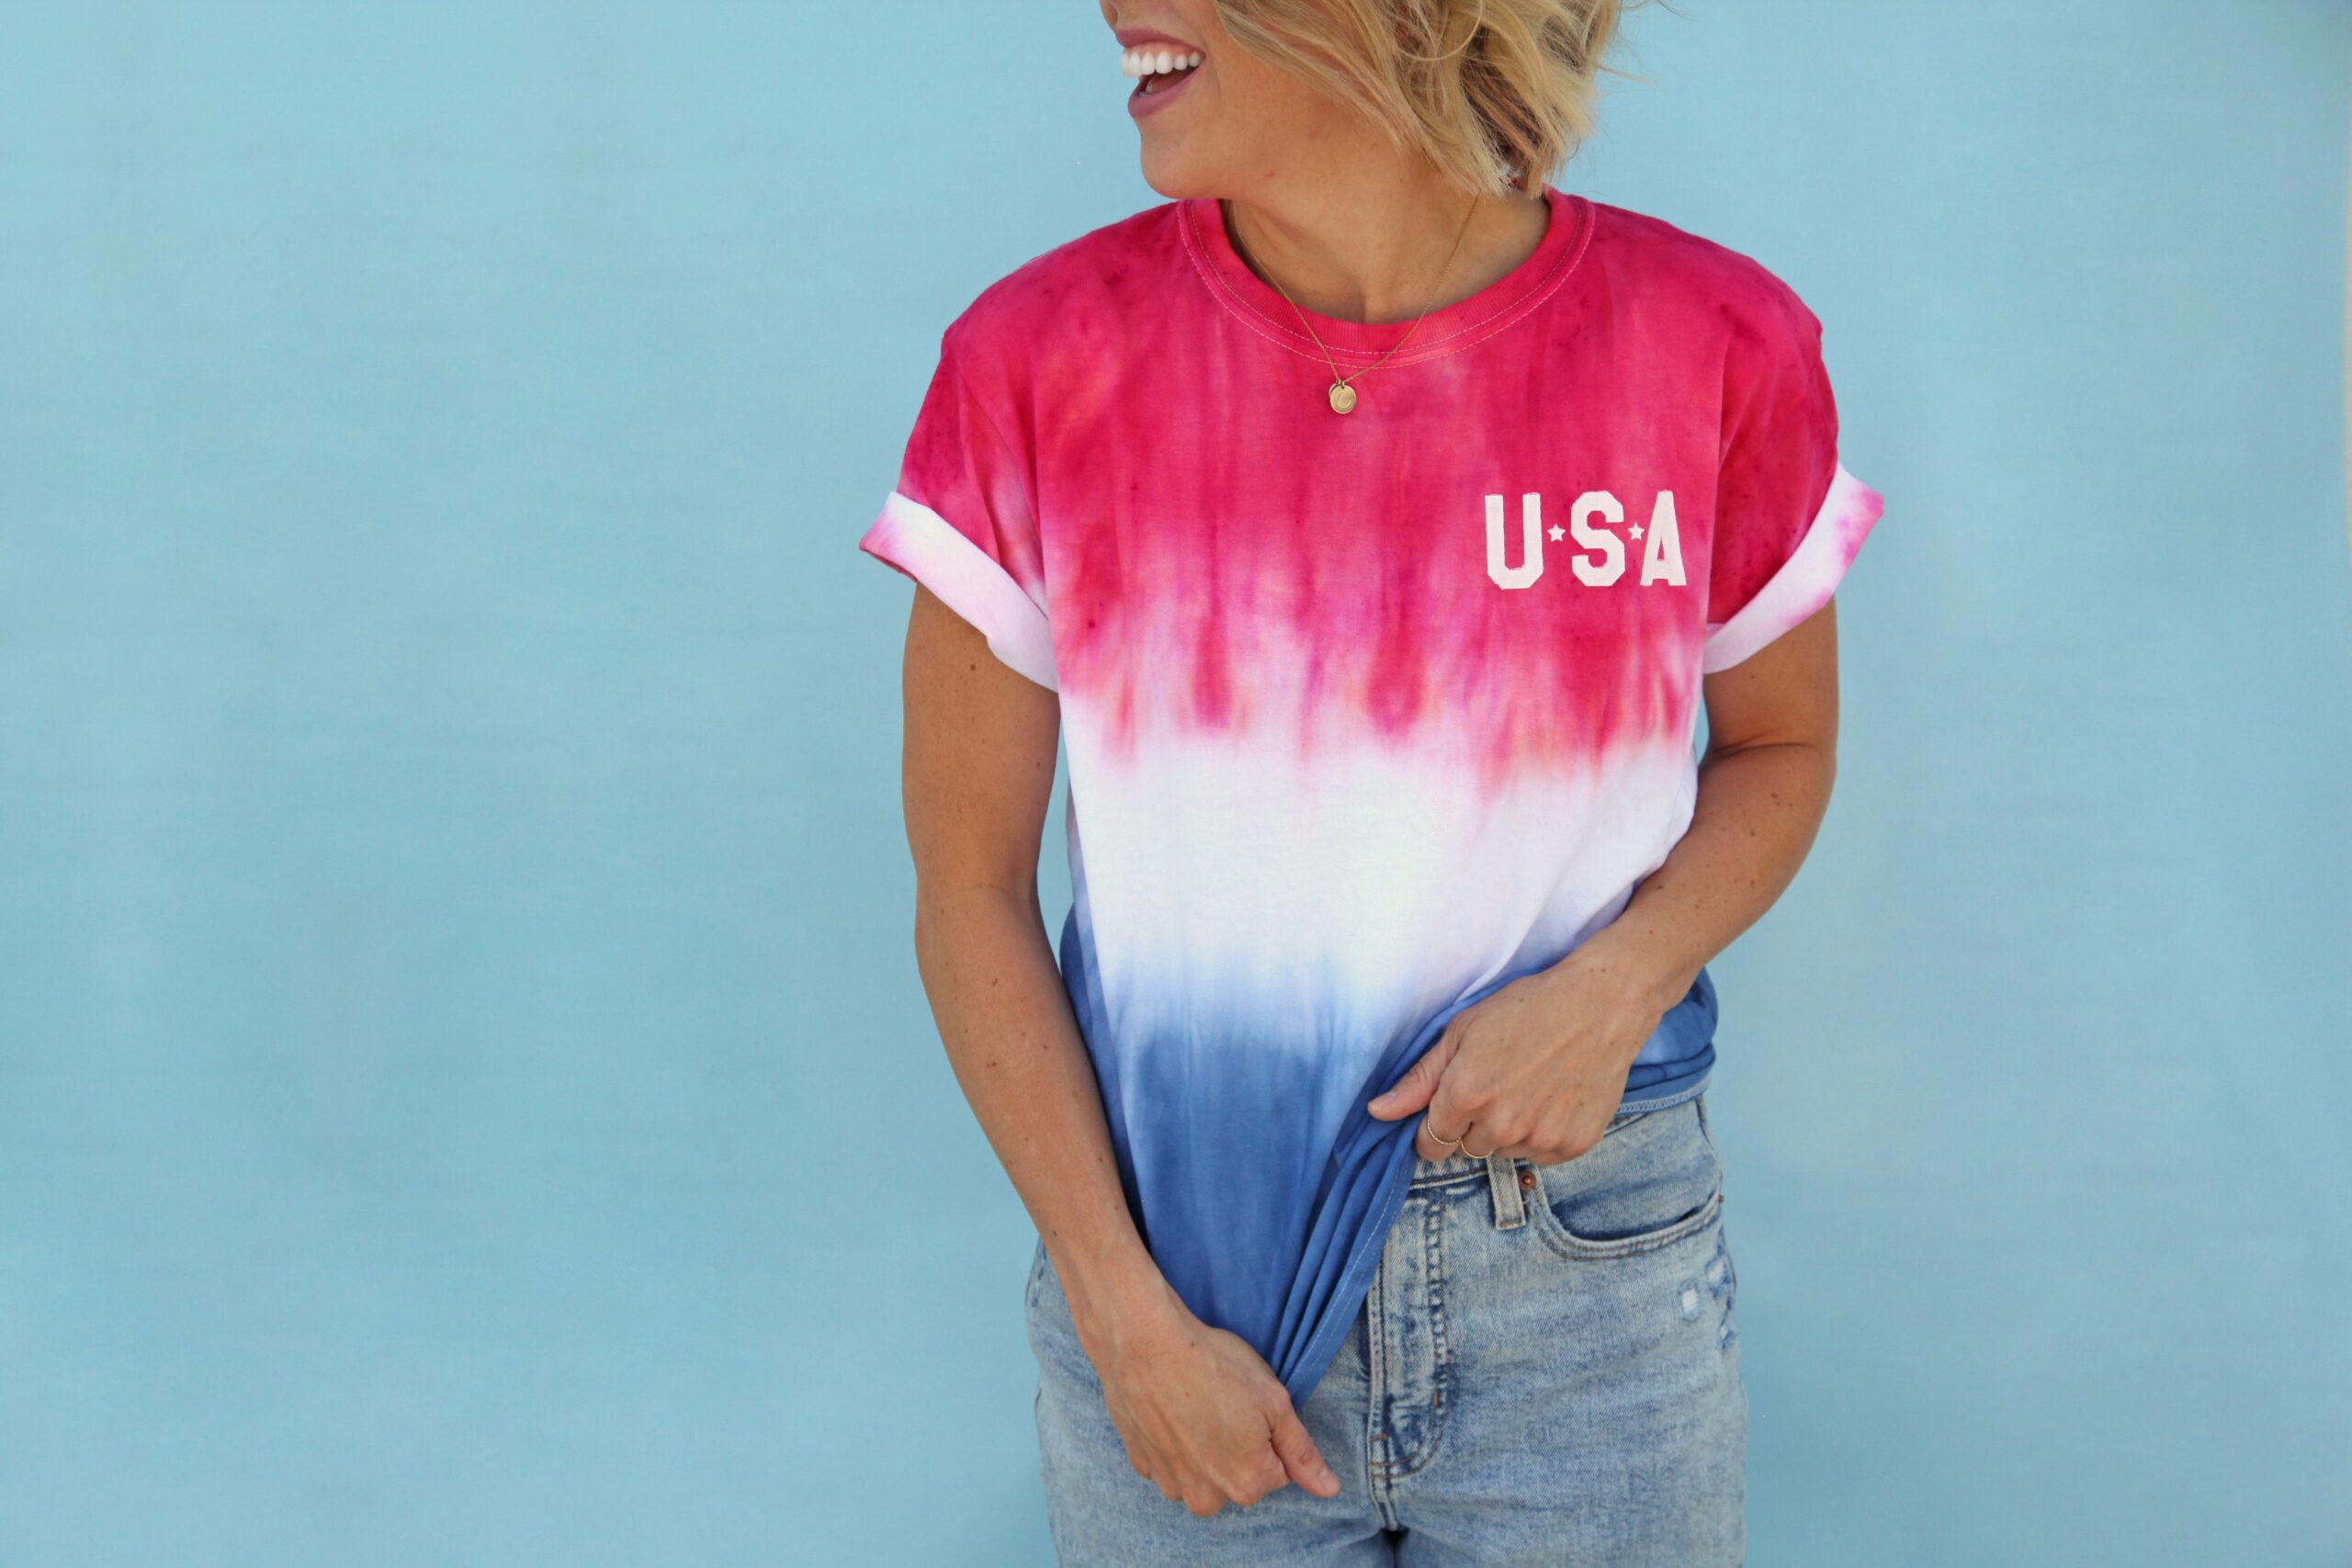 DIY Ombre Dye Shirt With 2 Colors! (Paintbrush Method) –